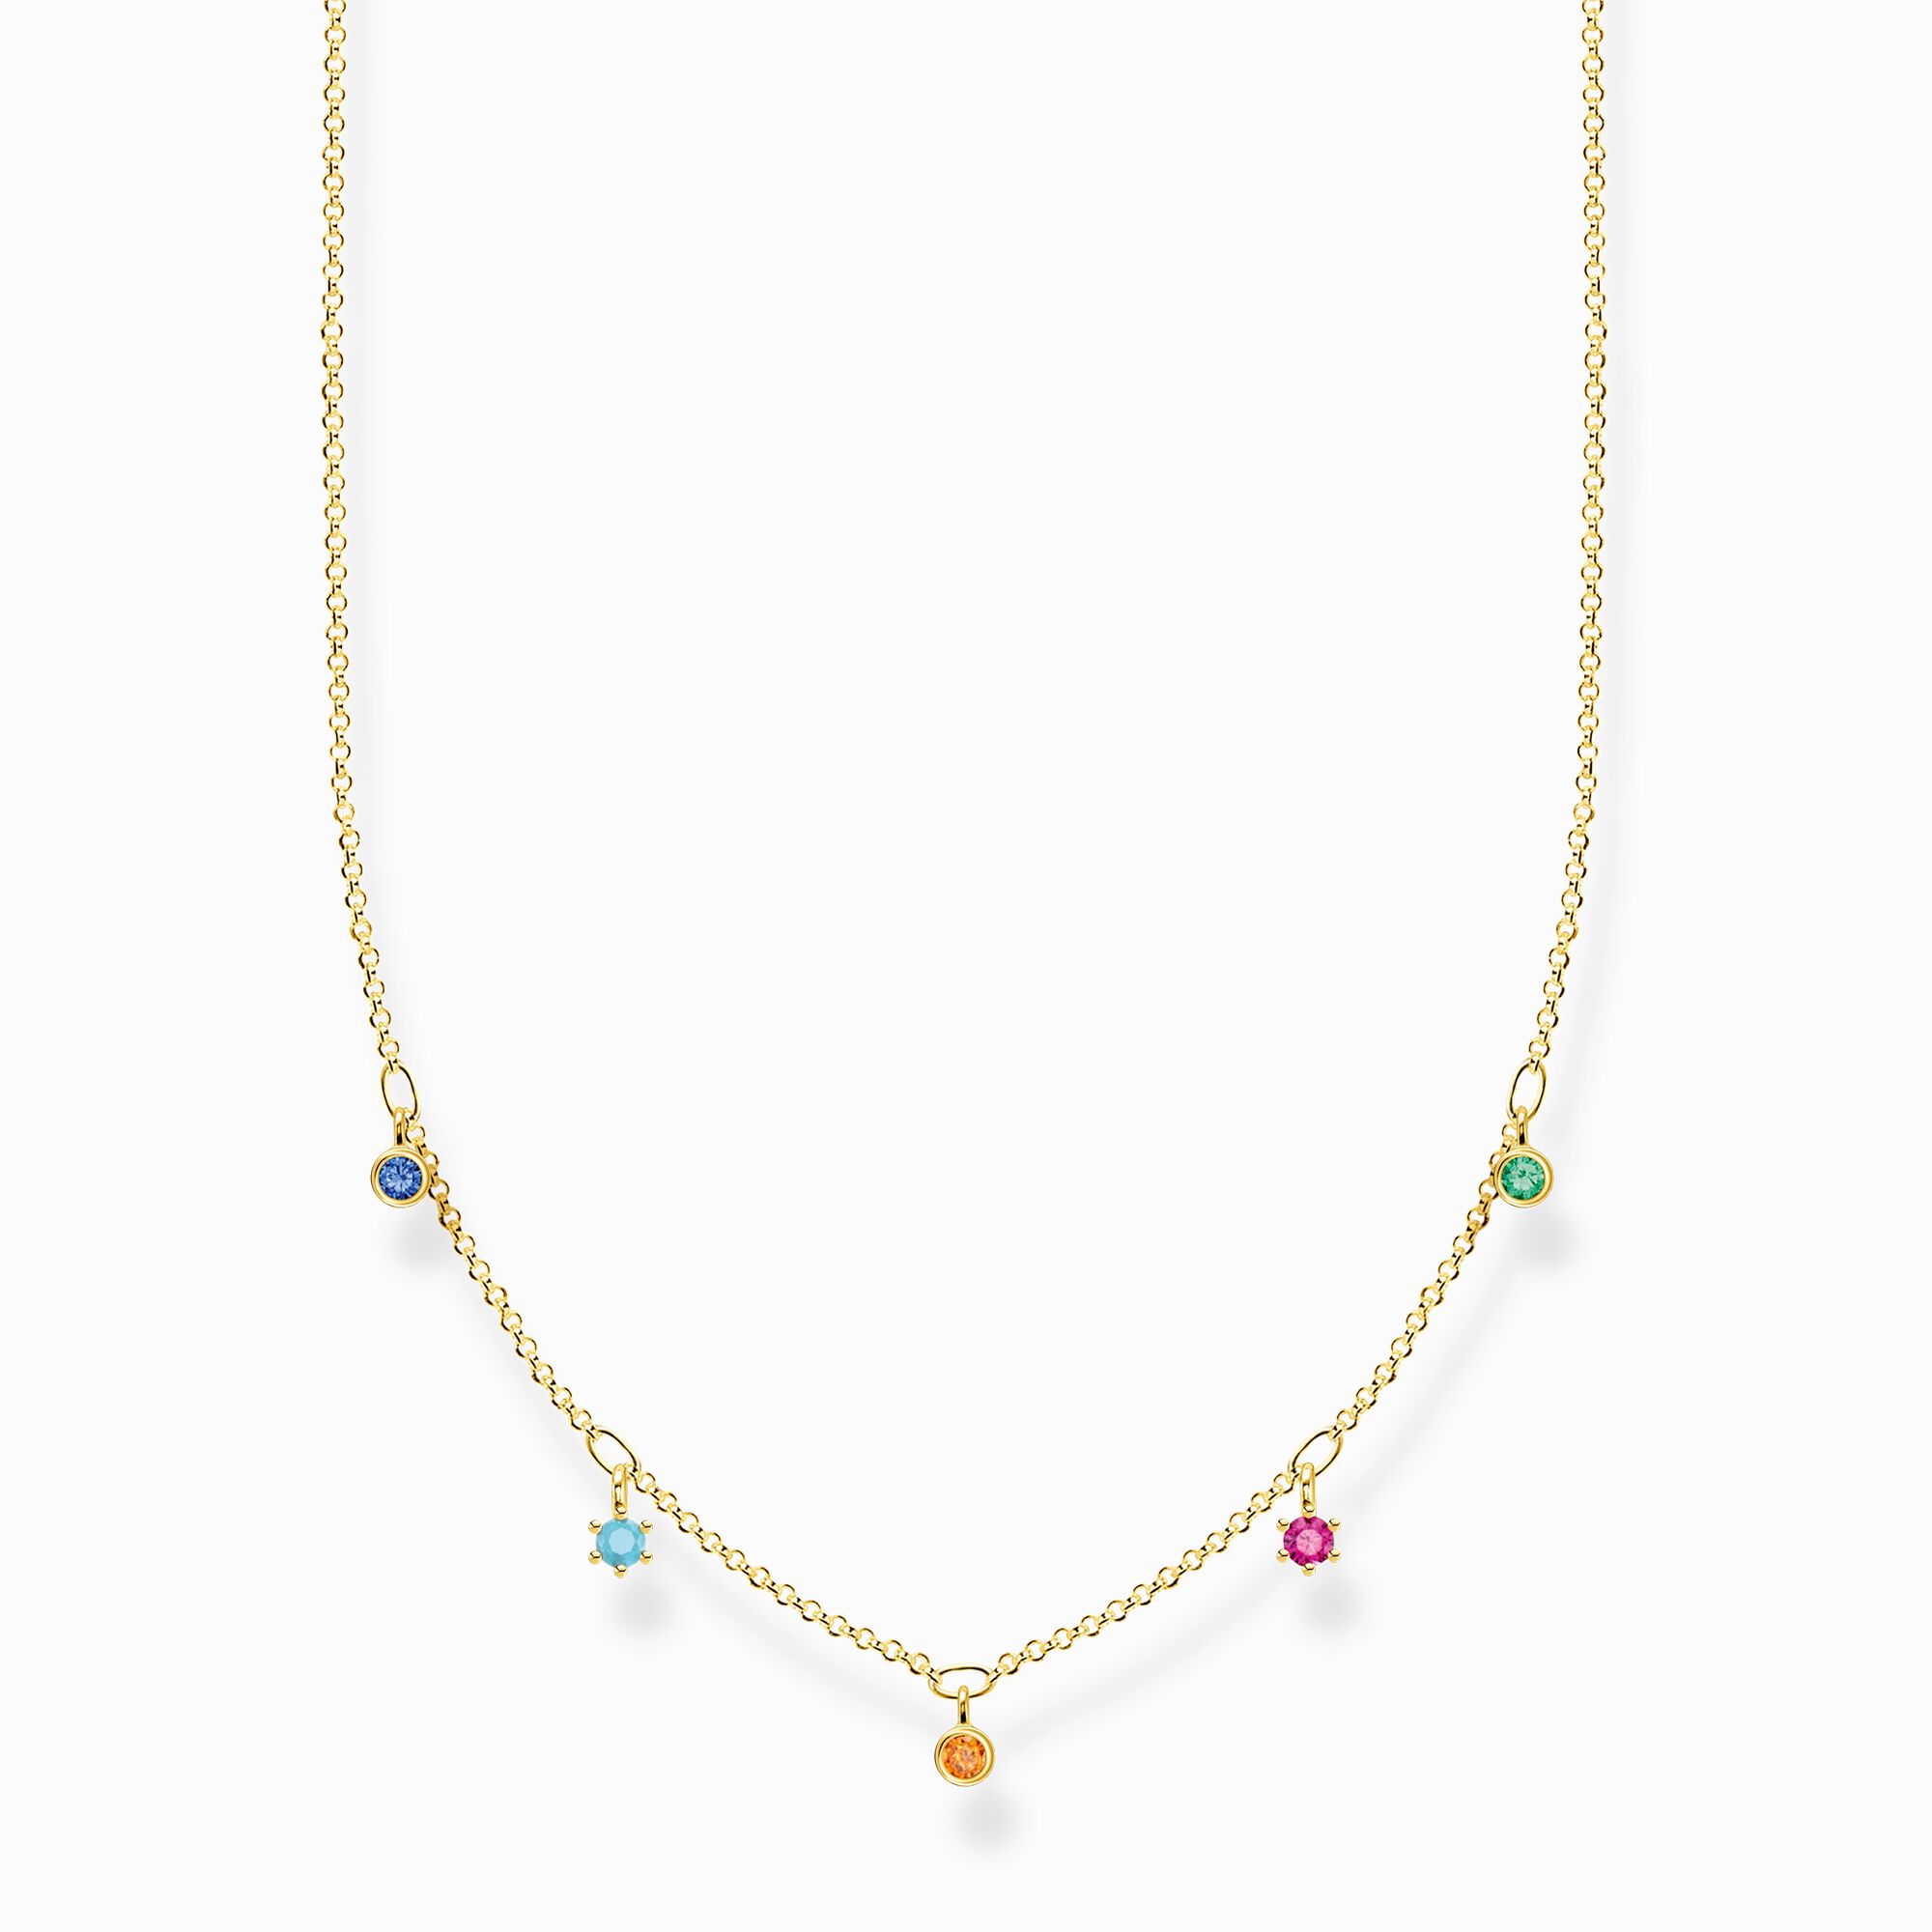 Necklace colourful stones, gold from the Charming Collection collection in the THOMAS SABO online store